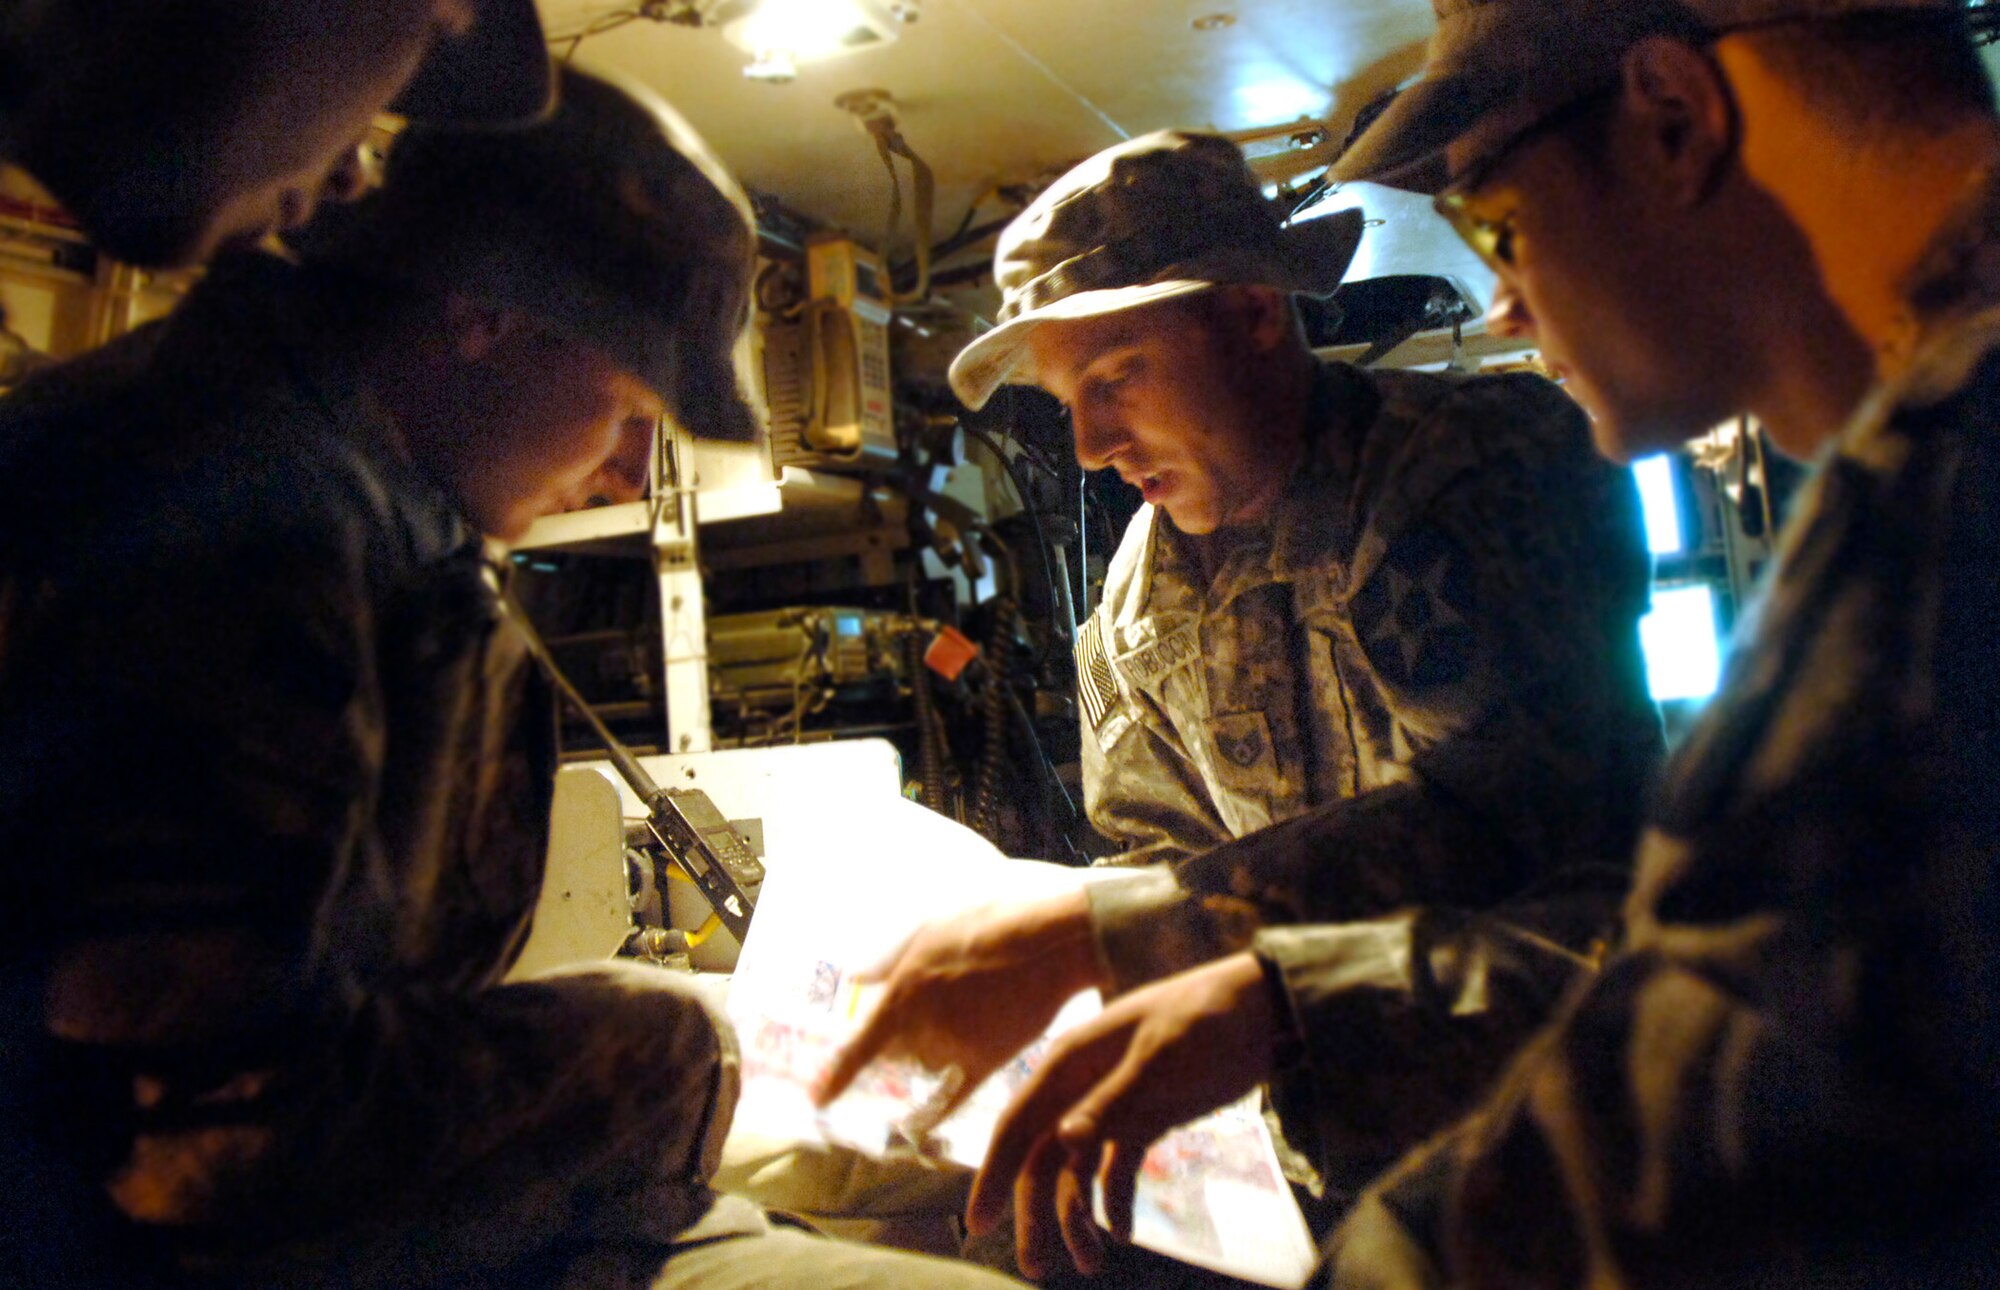 During an early morning planning session in the back of a Stryker assault vehicle, Staff Sgt. Christopher Froboccino (center) shows his Soldier counterparts the route they will be traveling through Baghdad.  Sergeant Froboccino is a joint terminal attack controller in charge of communicating coordinates for close-air support during fire fights with enemy ground forces.  (U.S. Air Force photo/Tech. Sgt. Cecilio M. Ricardo Jr.)